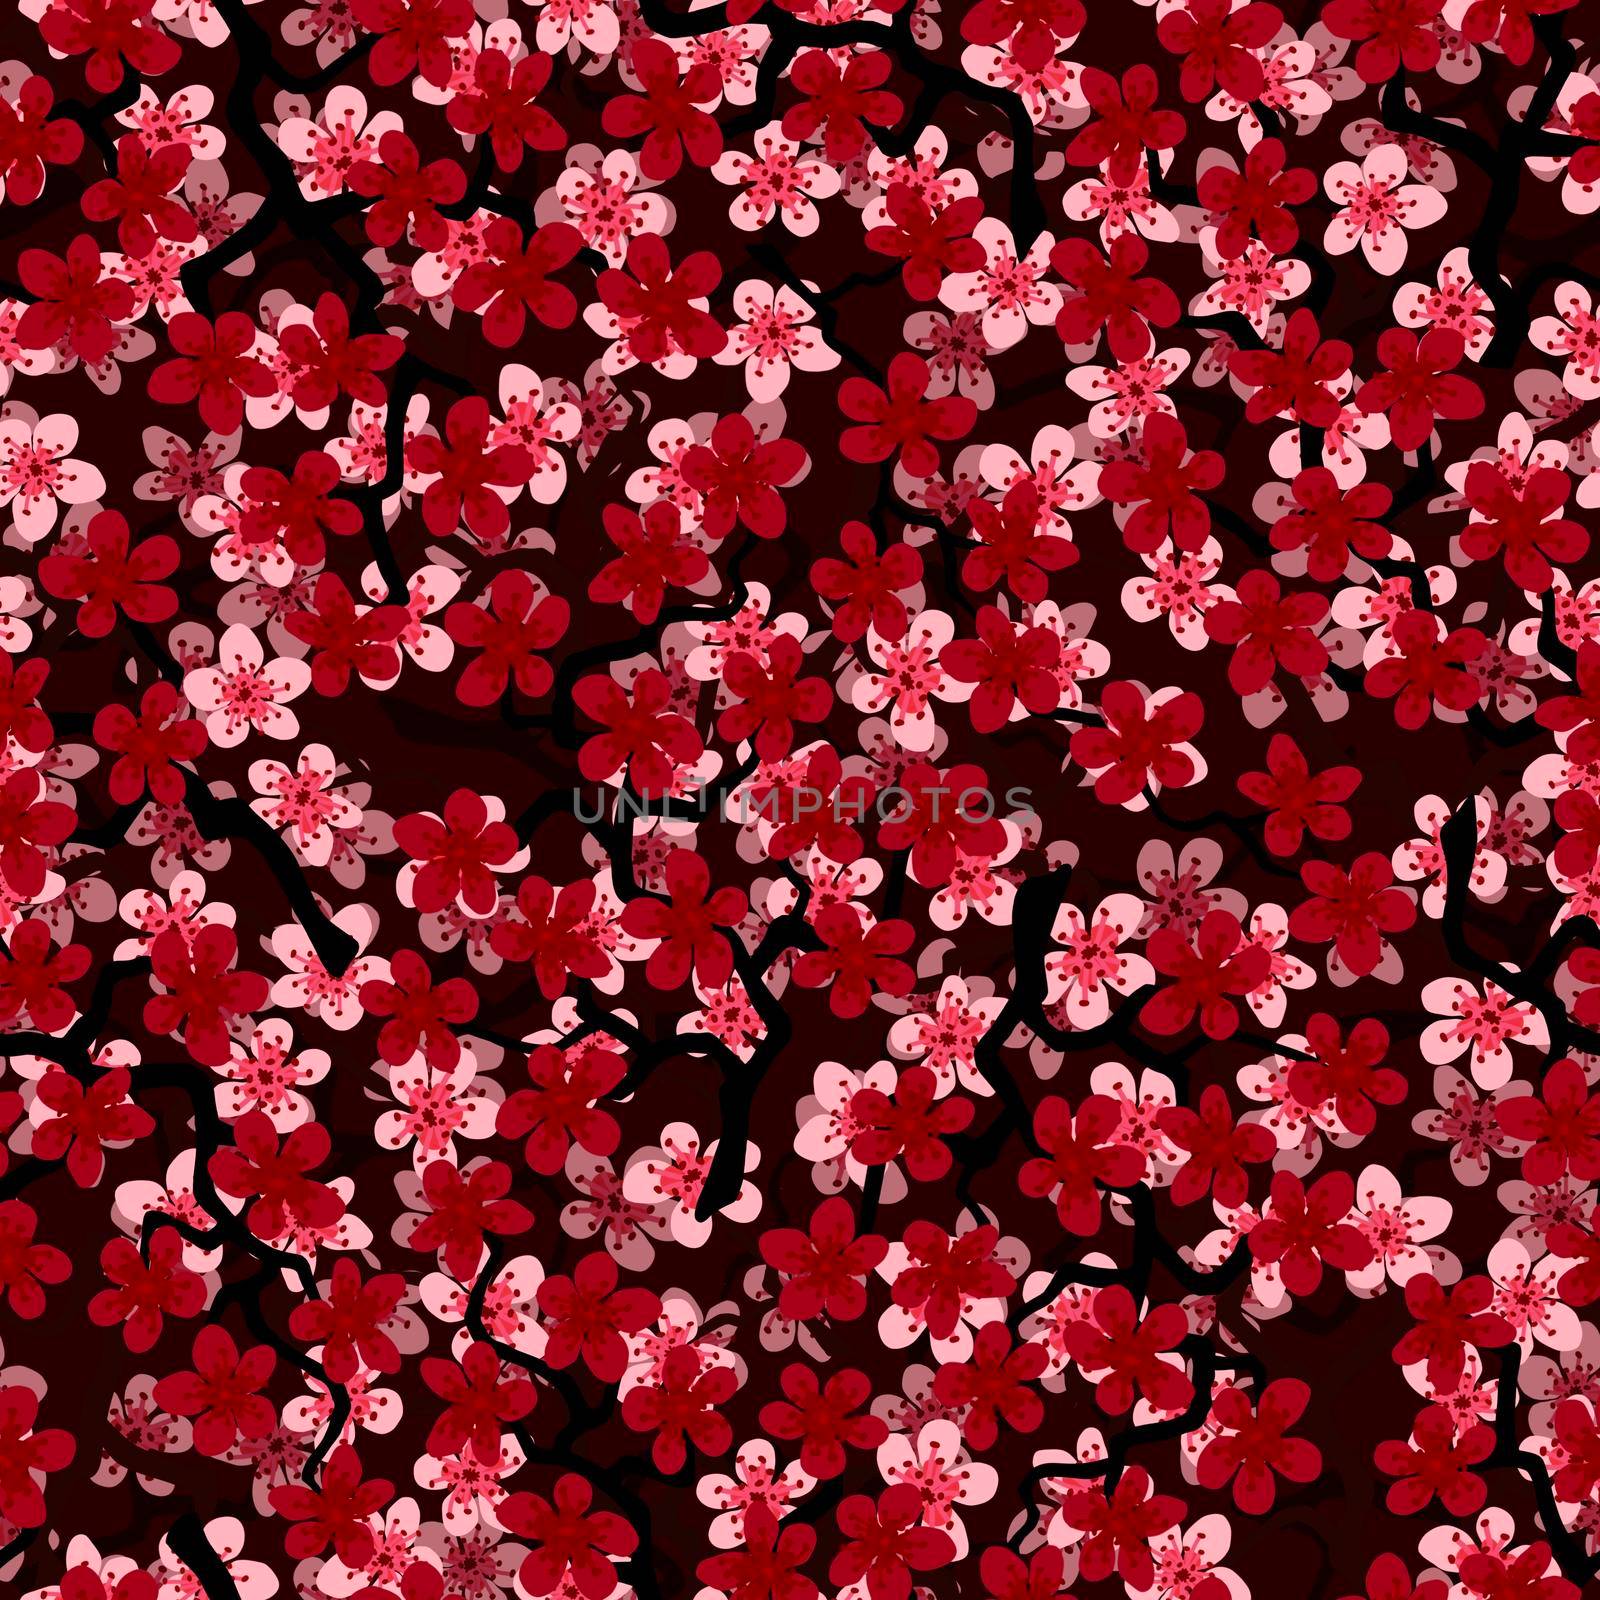 Seamless pattern with blossoming Japanese cherry sakura branches for fabric,packaging,wallpaper,textile decor,design, invitations,print,gift wrap,manufacturing.Pink and red flowers on black background